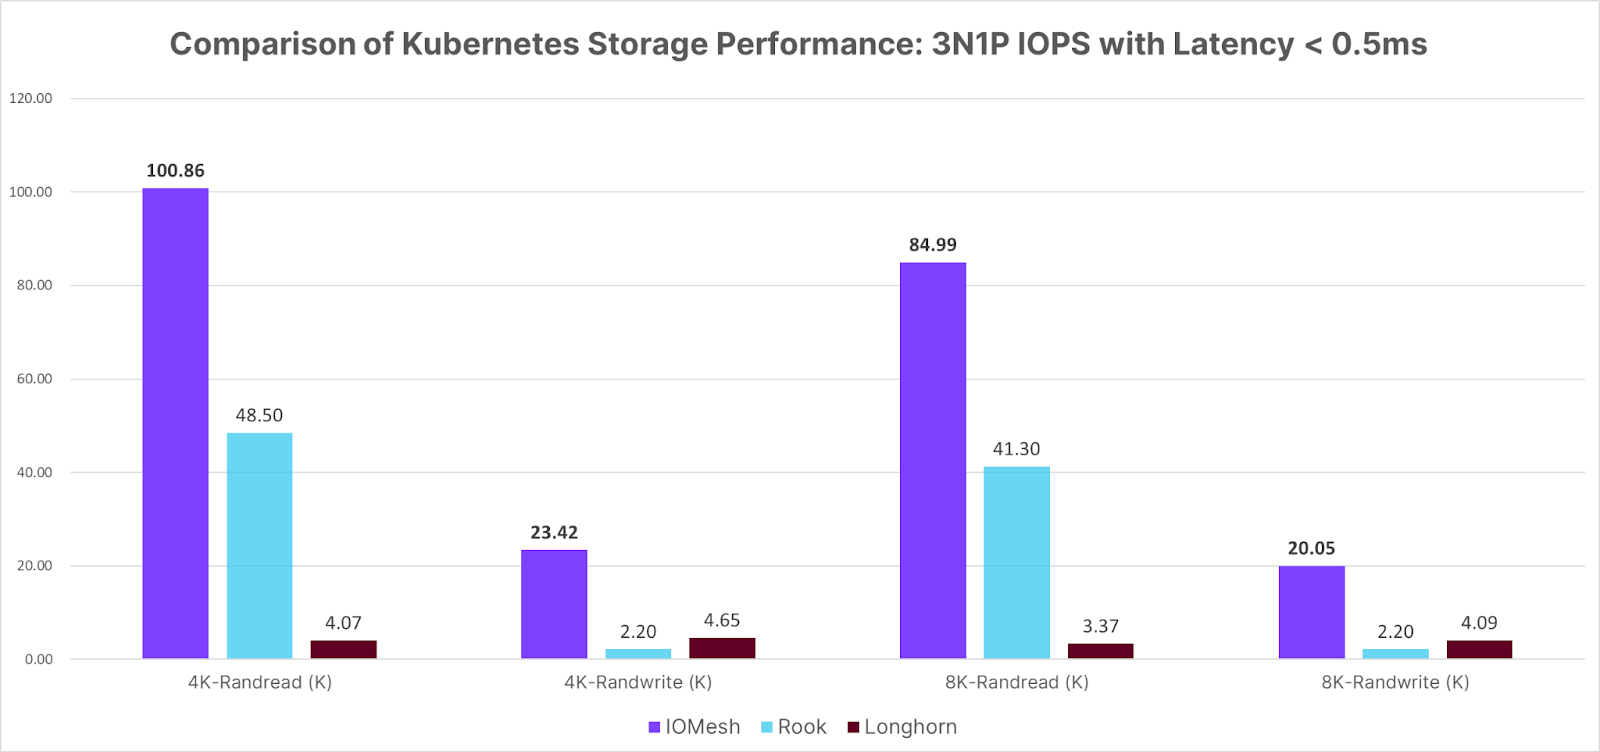 Comparison of Kubernetes Storage Performance: 3N1P IoPS with Latency < 0.5ms